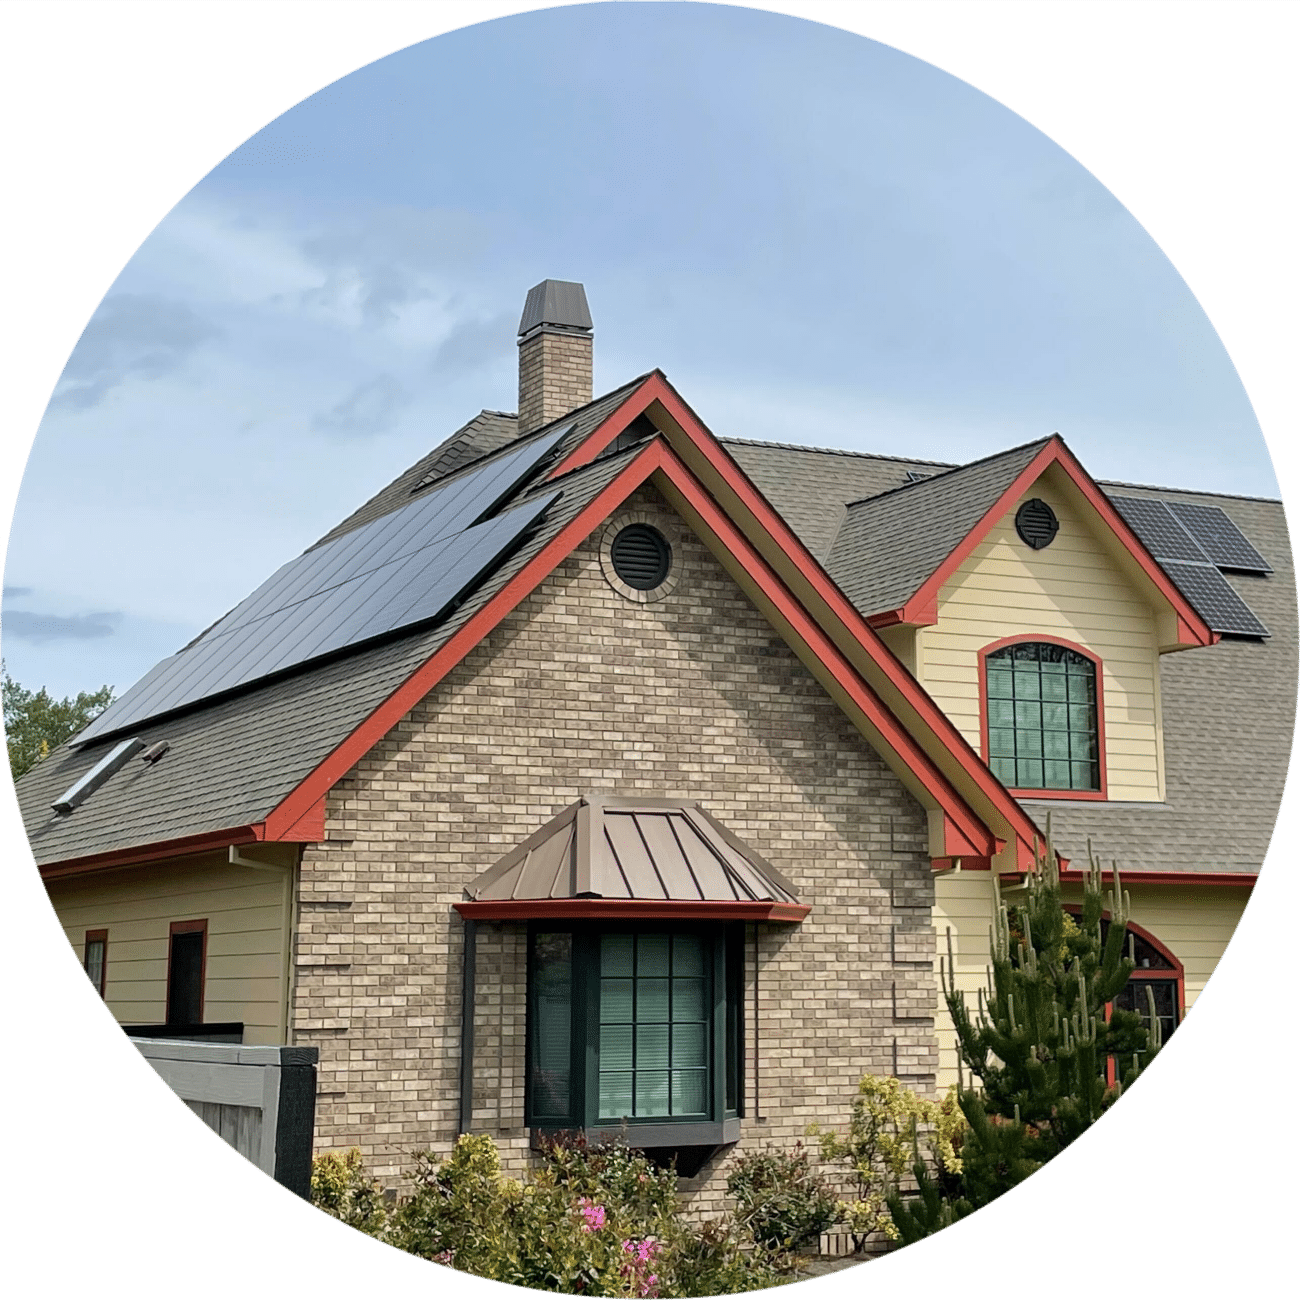 Solar panel installer experts serving Medford, Ashland, Grants Pass, and across Southern Oregon